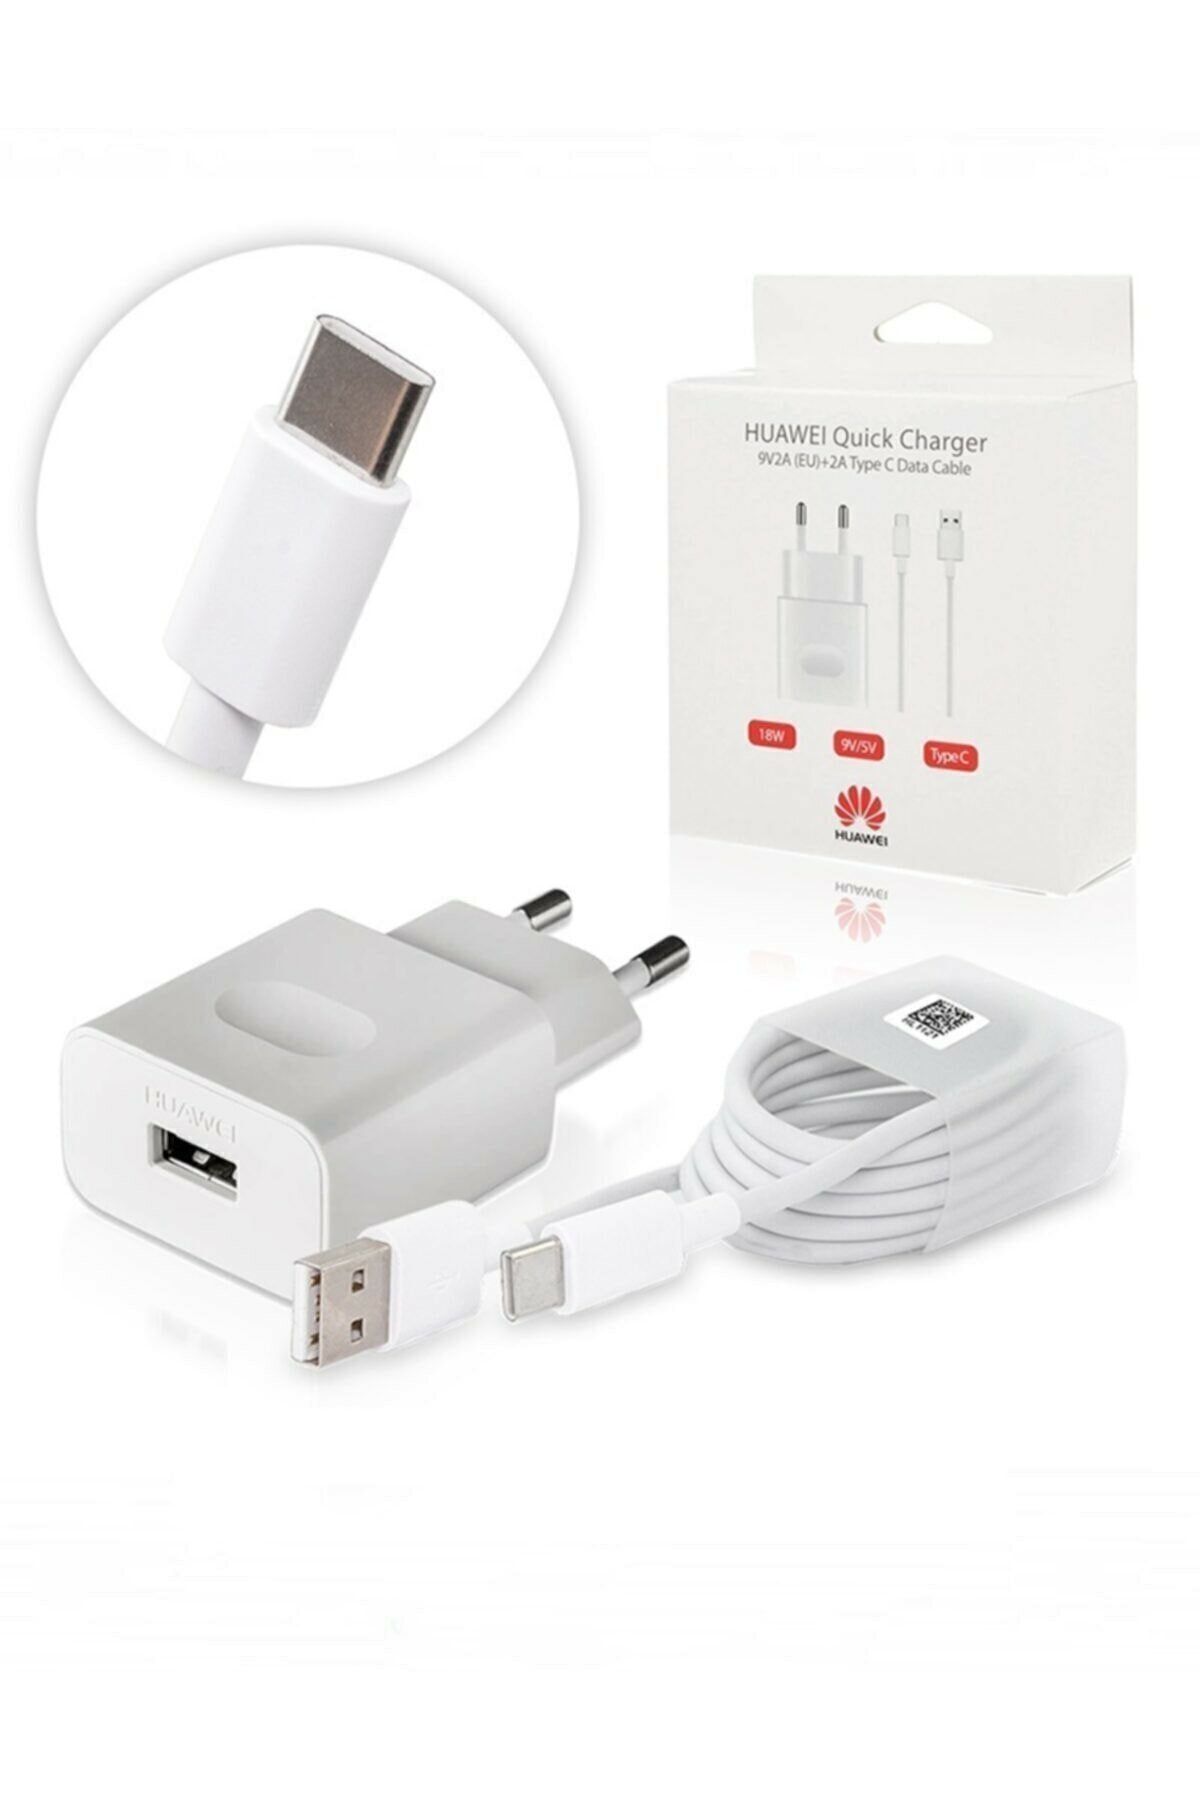 Chargeur huawei USB type C 2A